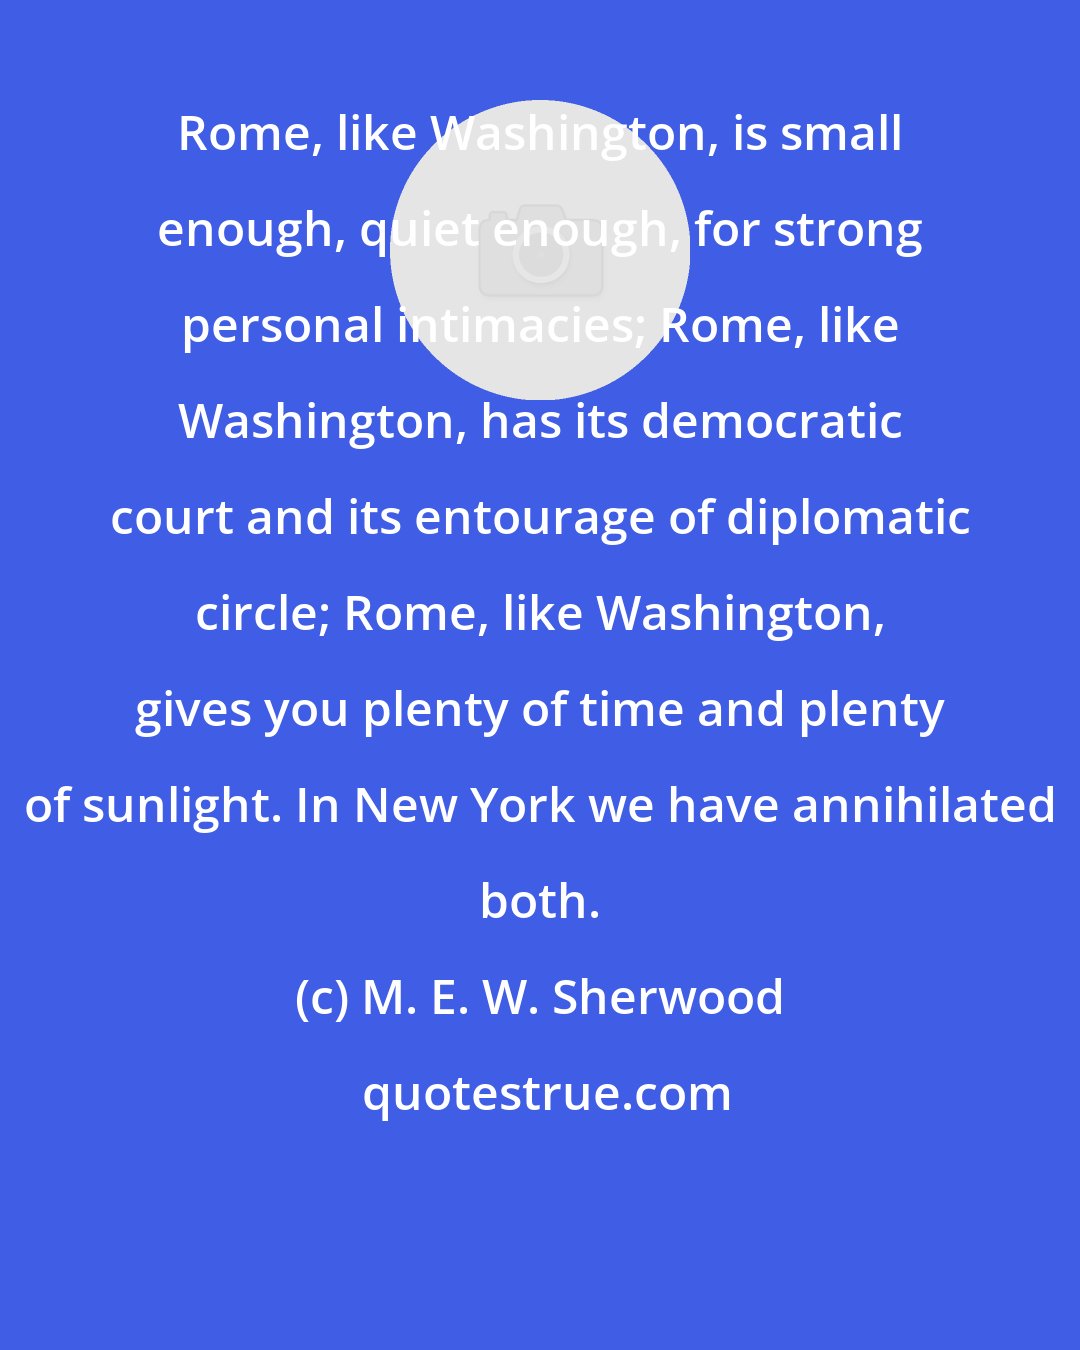 M. E. W. Sherwood: Rome, like Washington, is small enough, quiet enough, for strong personal intimacies; Rome, like Washington, has its democratic court and its entourage of diplomatic circle; Rome, like Washington, gives you plenty of time and plenty of sunlight. In New York we have annihilated both.